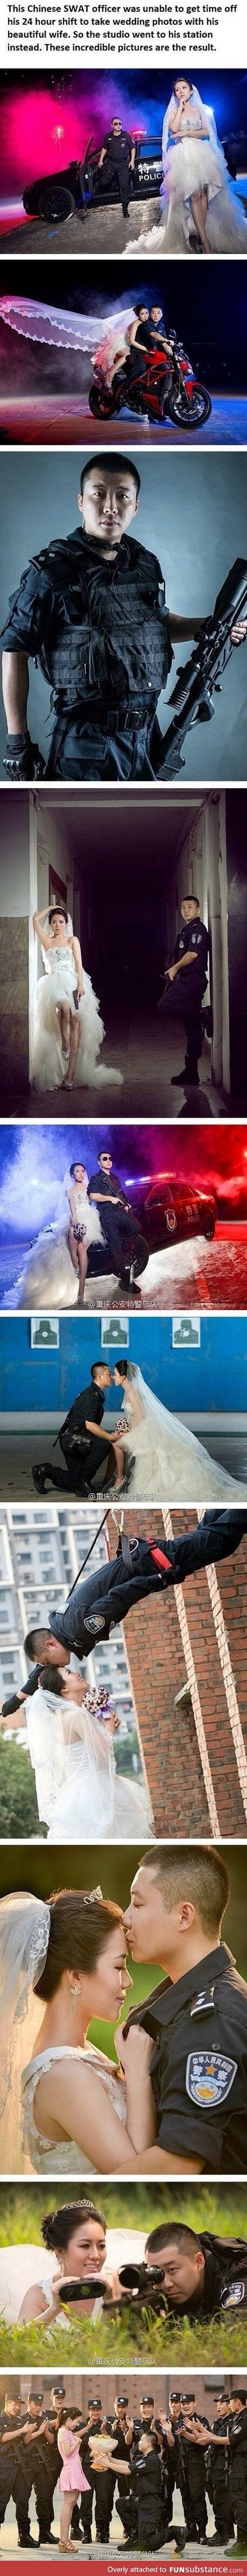 A police marriage photo shoot